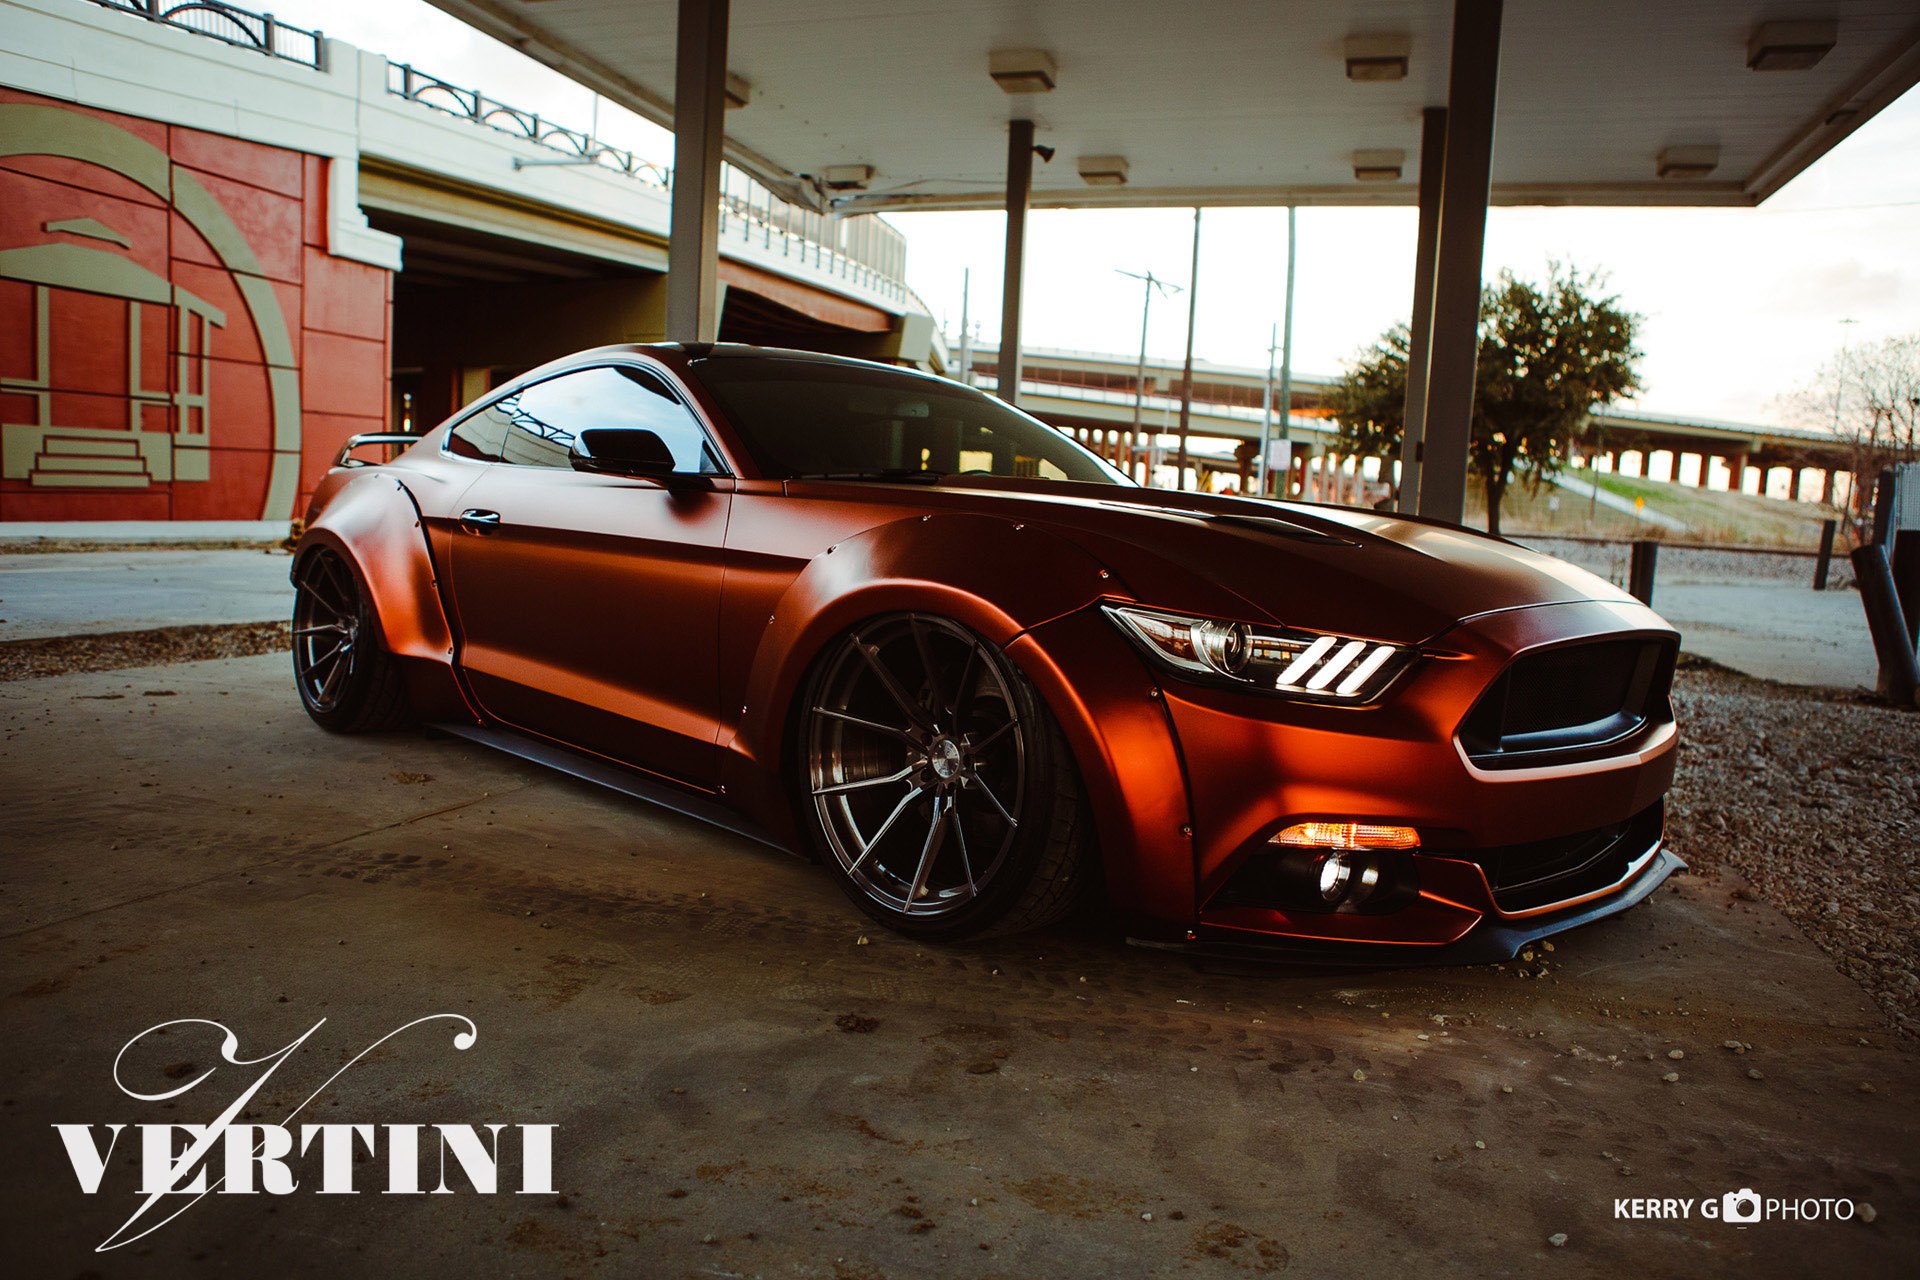 Aftermarket Projector Headlights on Orange Ford Mustang - Photo by Vertini Wheels